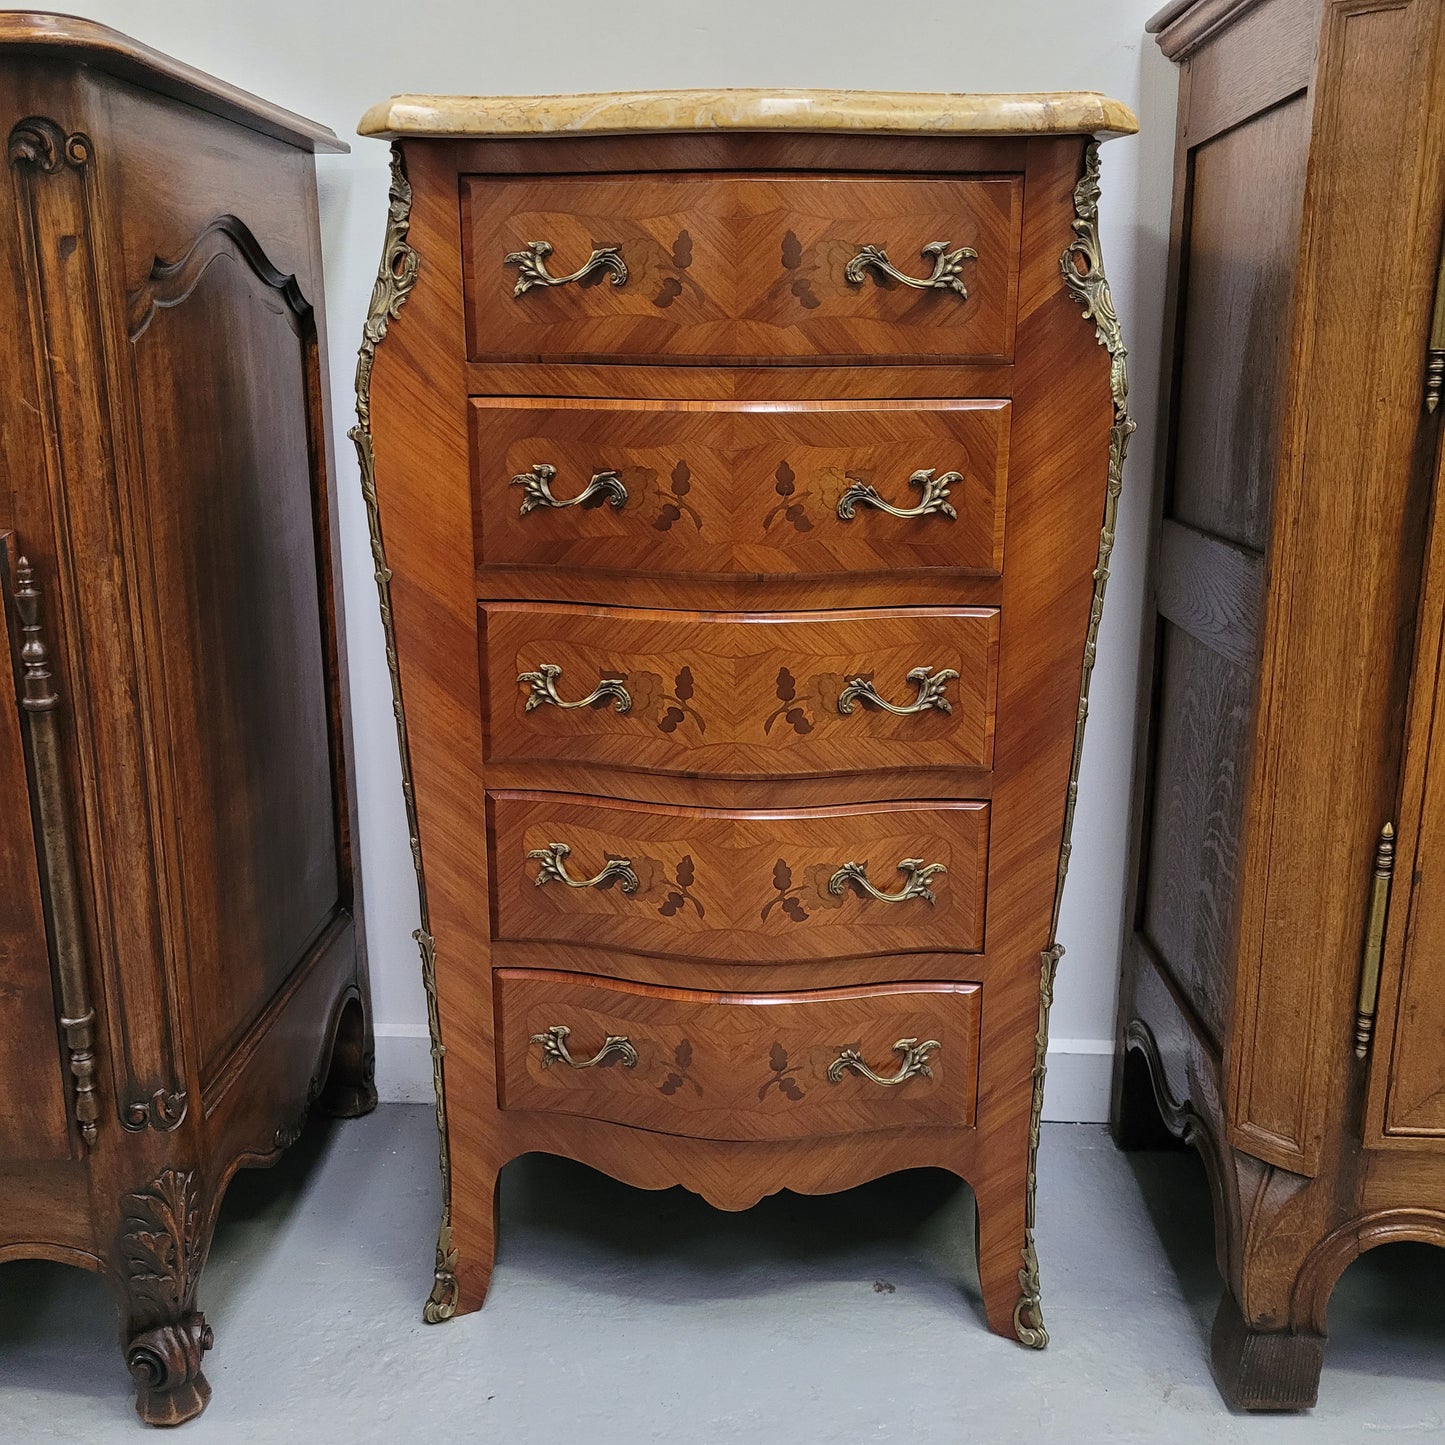 Stunning chest of five drawers with a marble top and decorative marquetry inlay. From circa 1930's this pieces has been fully restored. 